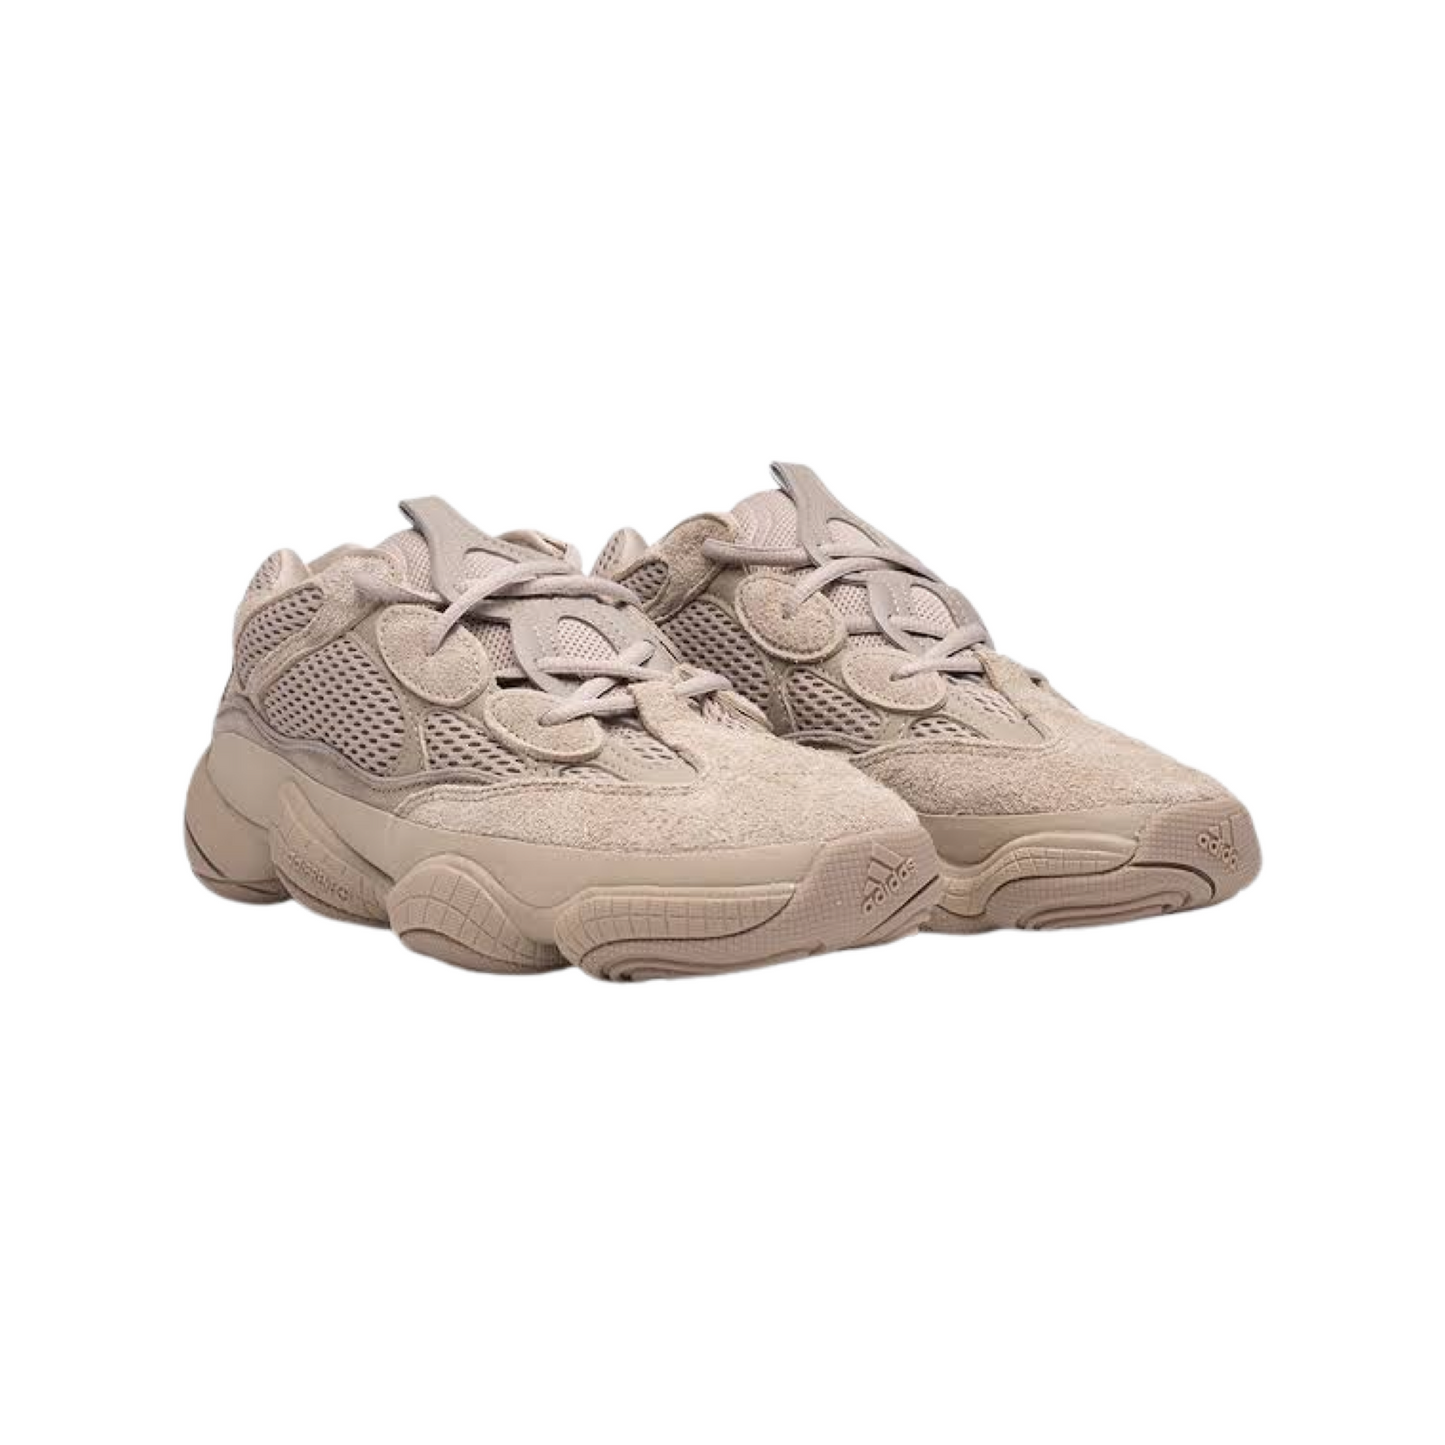 Yeezy 500 Taupe Light By adidas